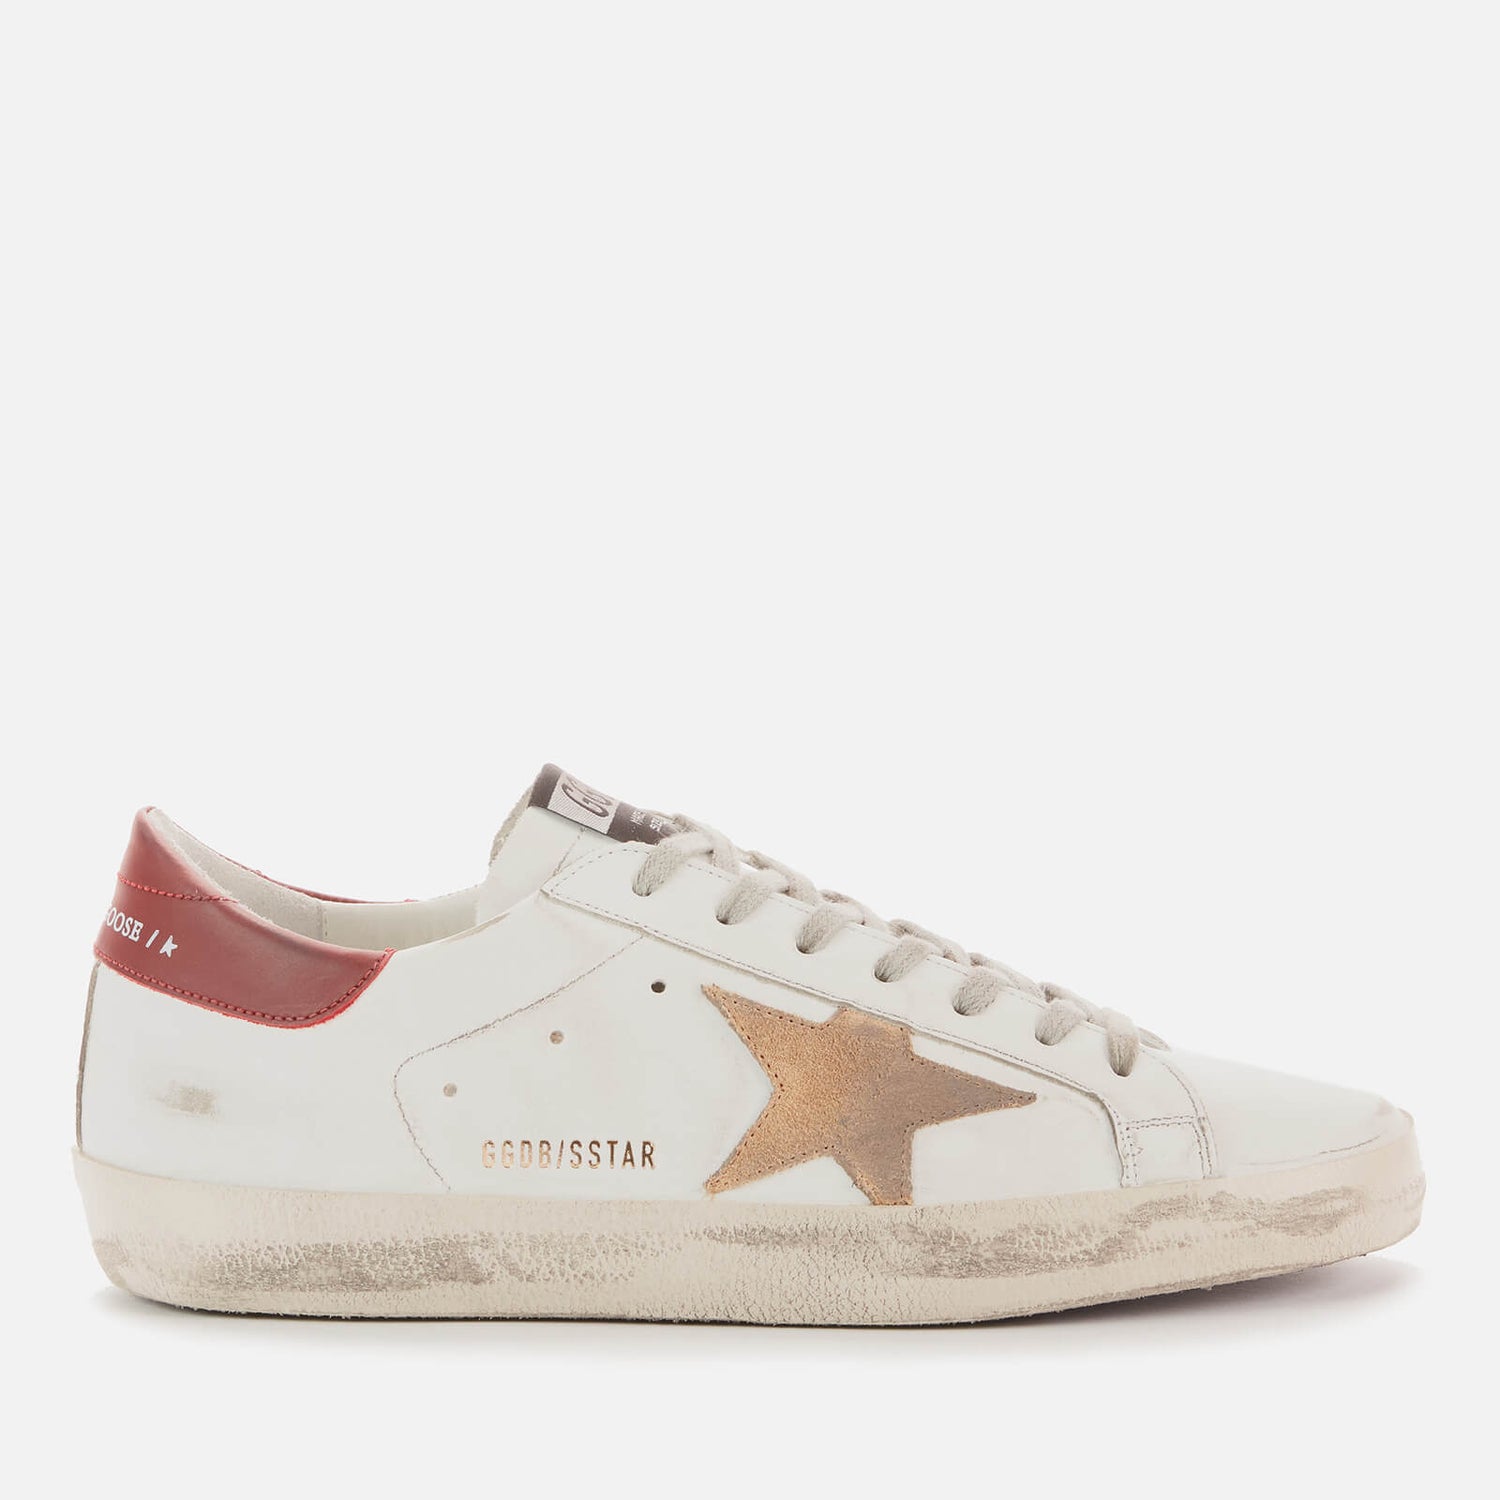 Golden Goose Men's Superstar Leather Trainers - White/Cappuccino/Bordeaux